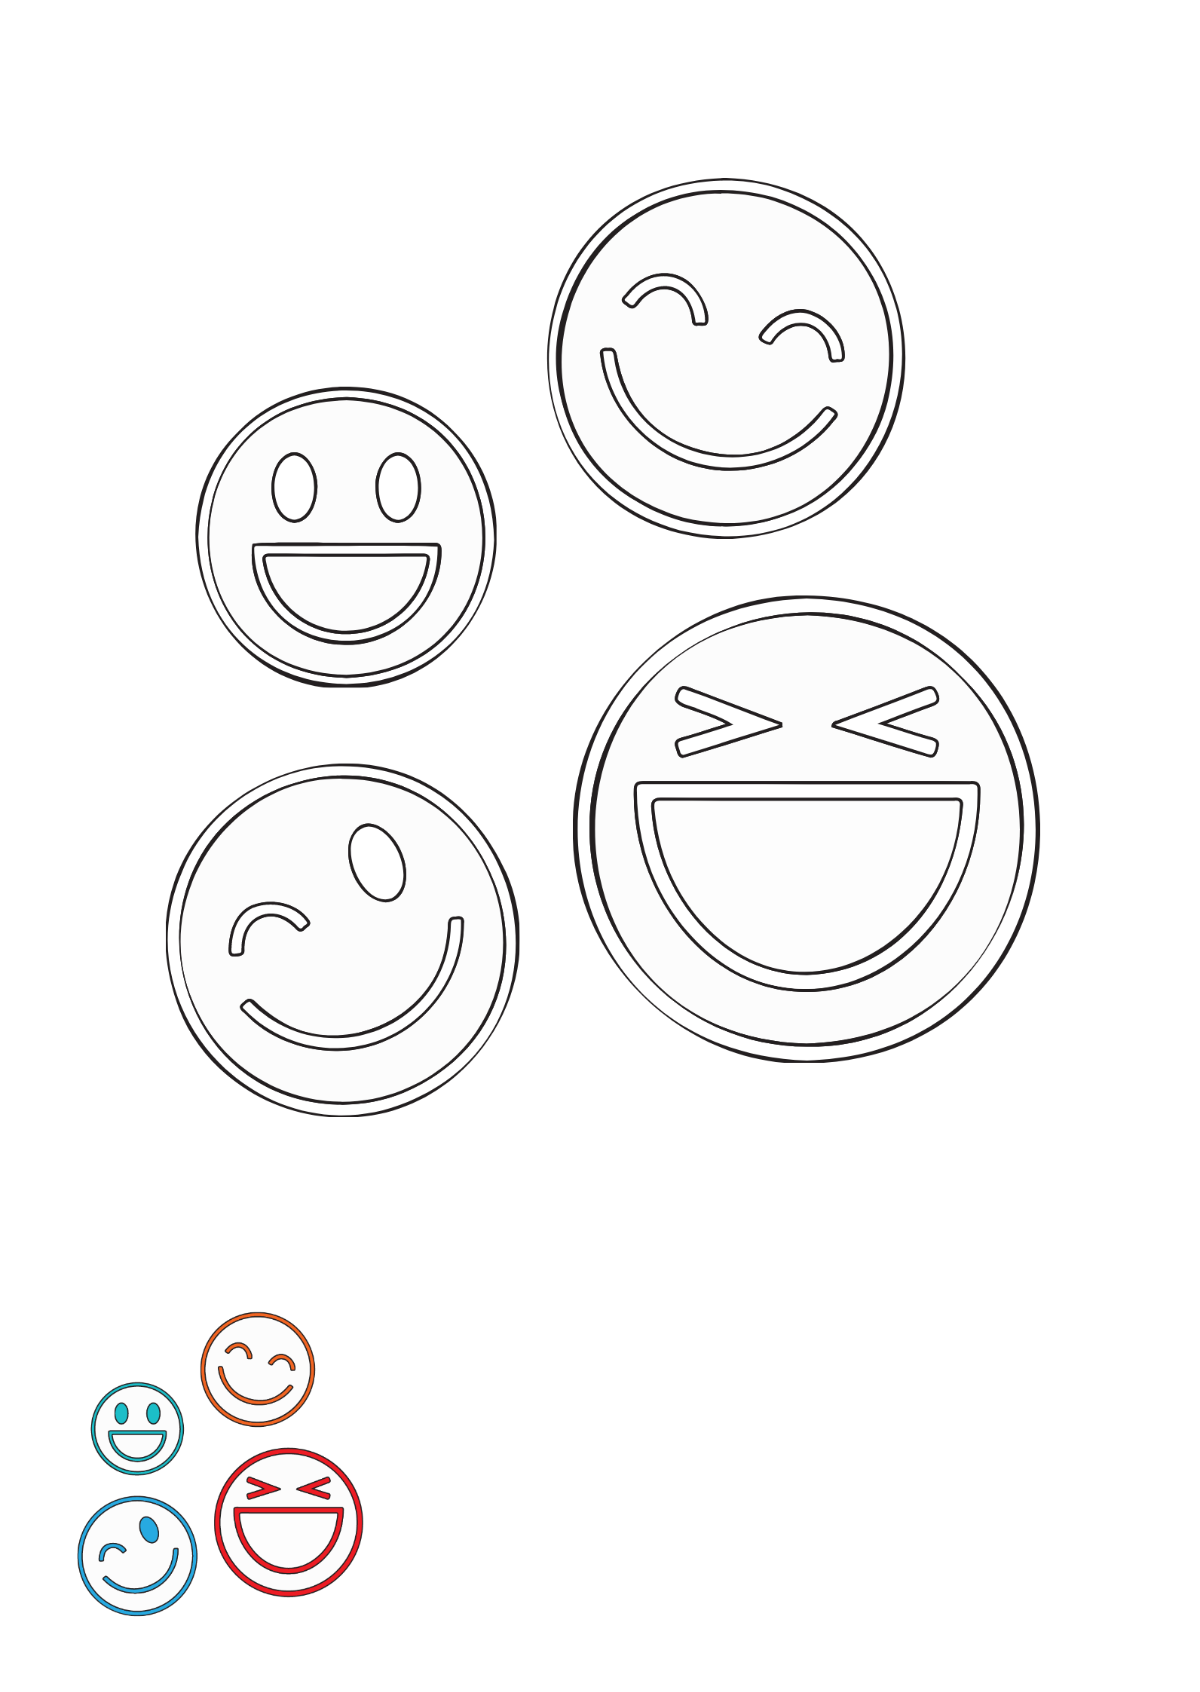 Smiley Outline coloring page